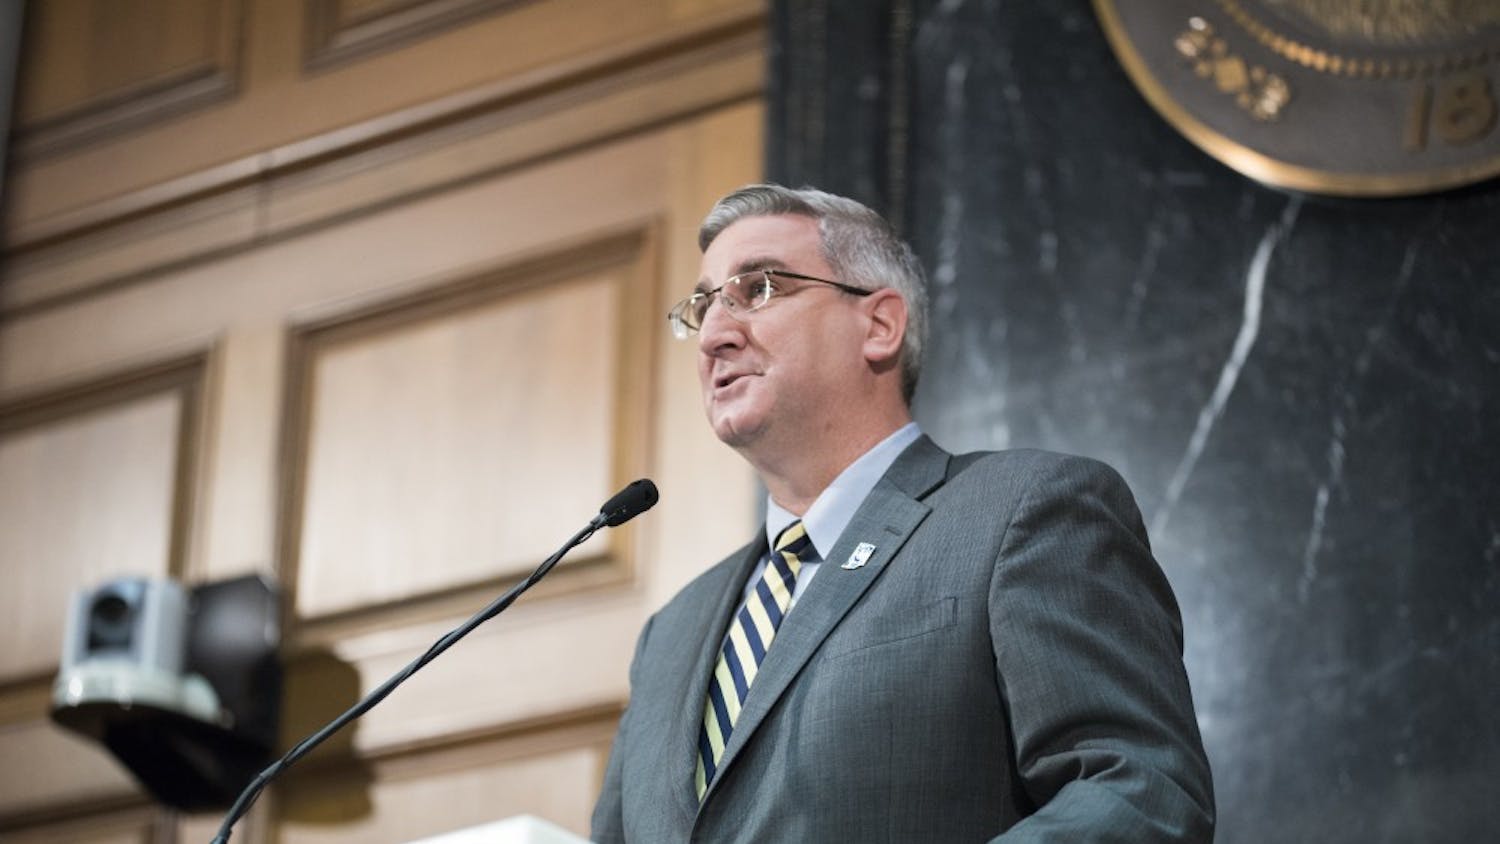 Gov. Eric Holcomb talks to the state legislators and other invited guests at his first State of the State address on Jan. 17, 2017, in the Indiana Statehouse.&nbsp;Bloomington is suing Gov. Holcomb after the city's failed 2017 annexation attempt was blocked by the state legislature.